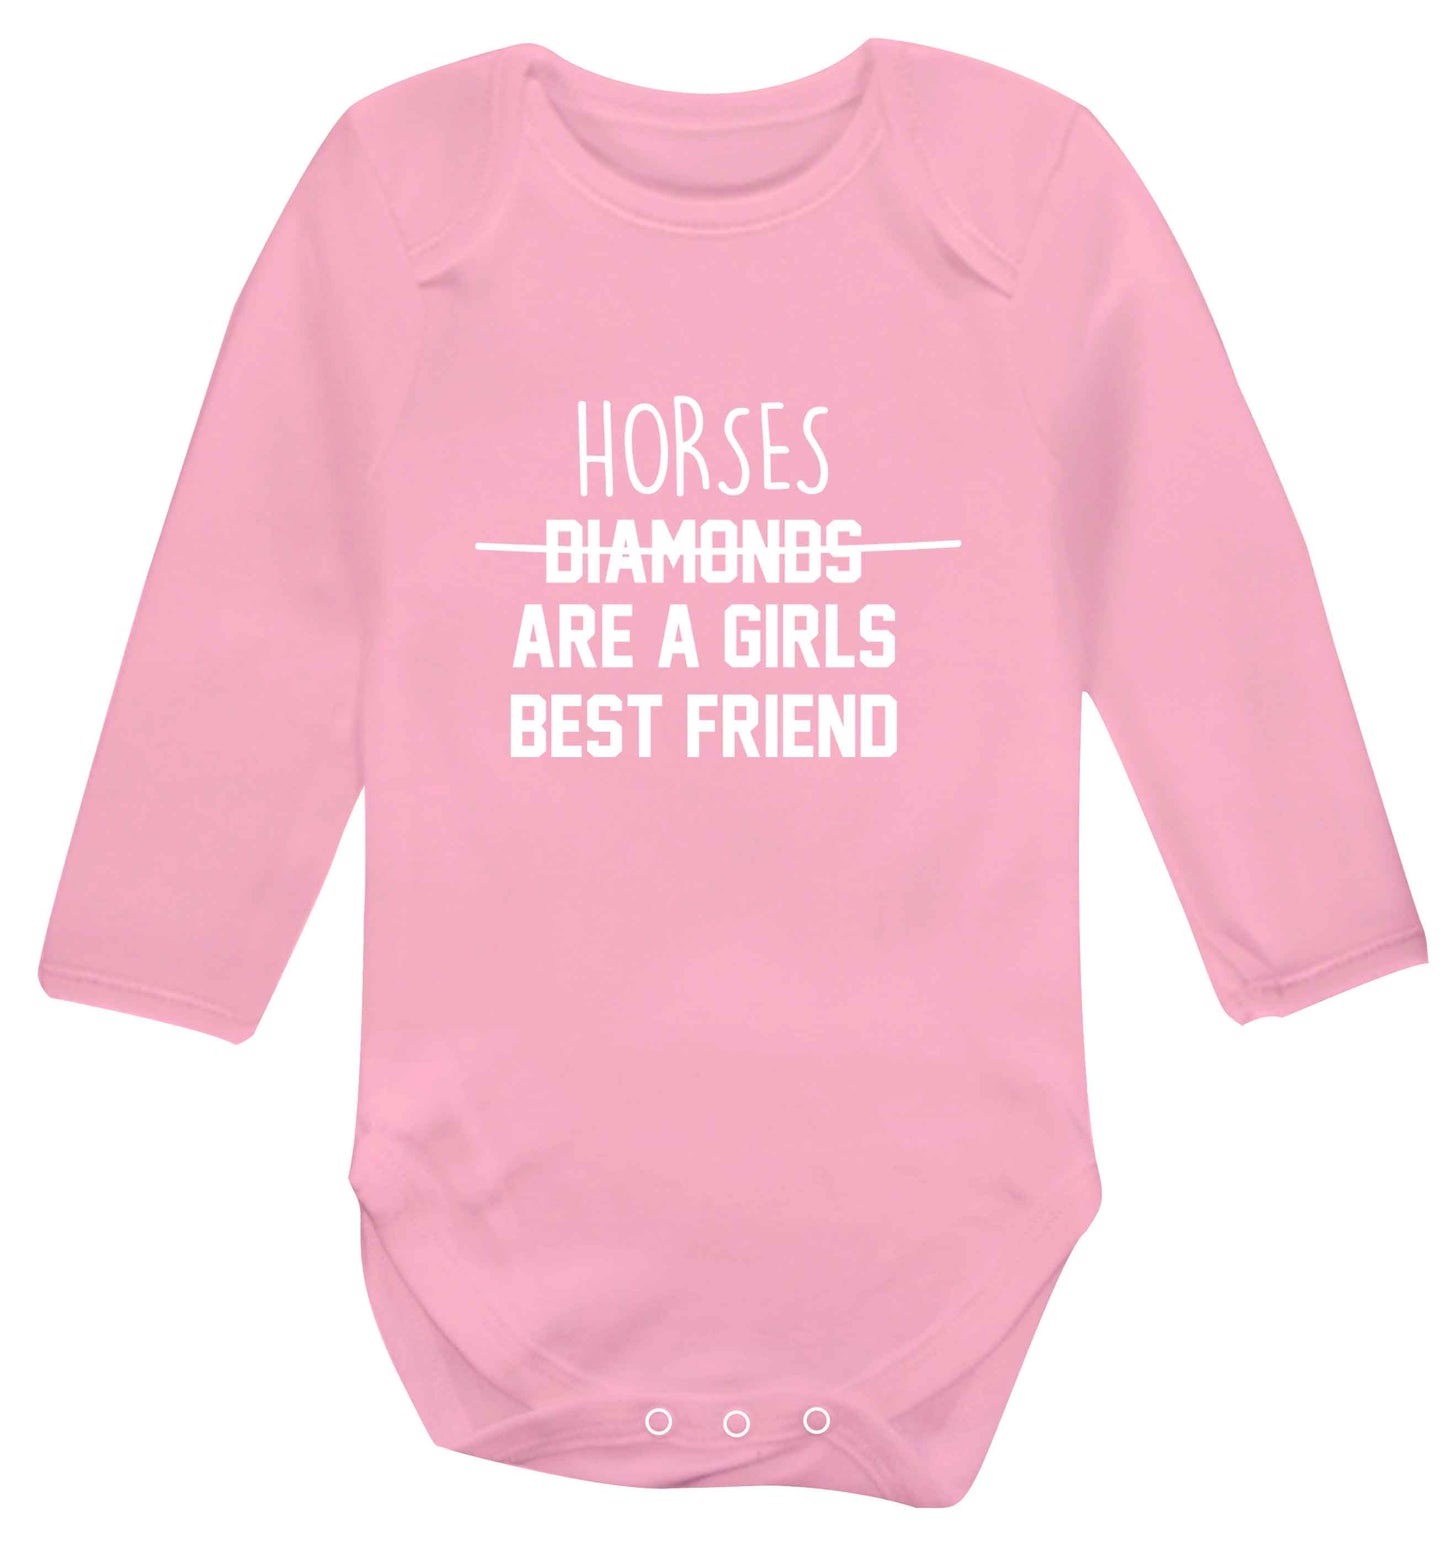 Horses are a girls best friend baby vest long sleeved pale pink 6-12 months